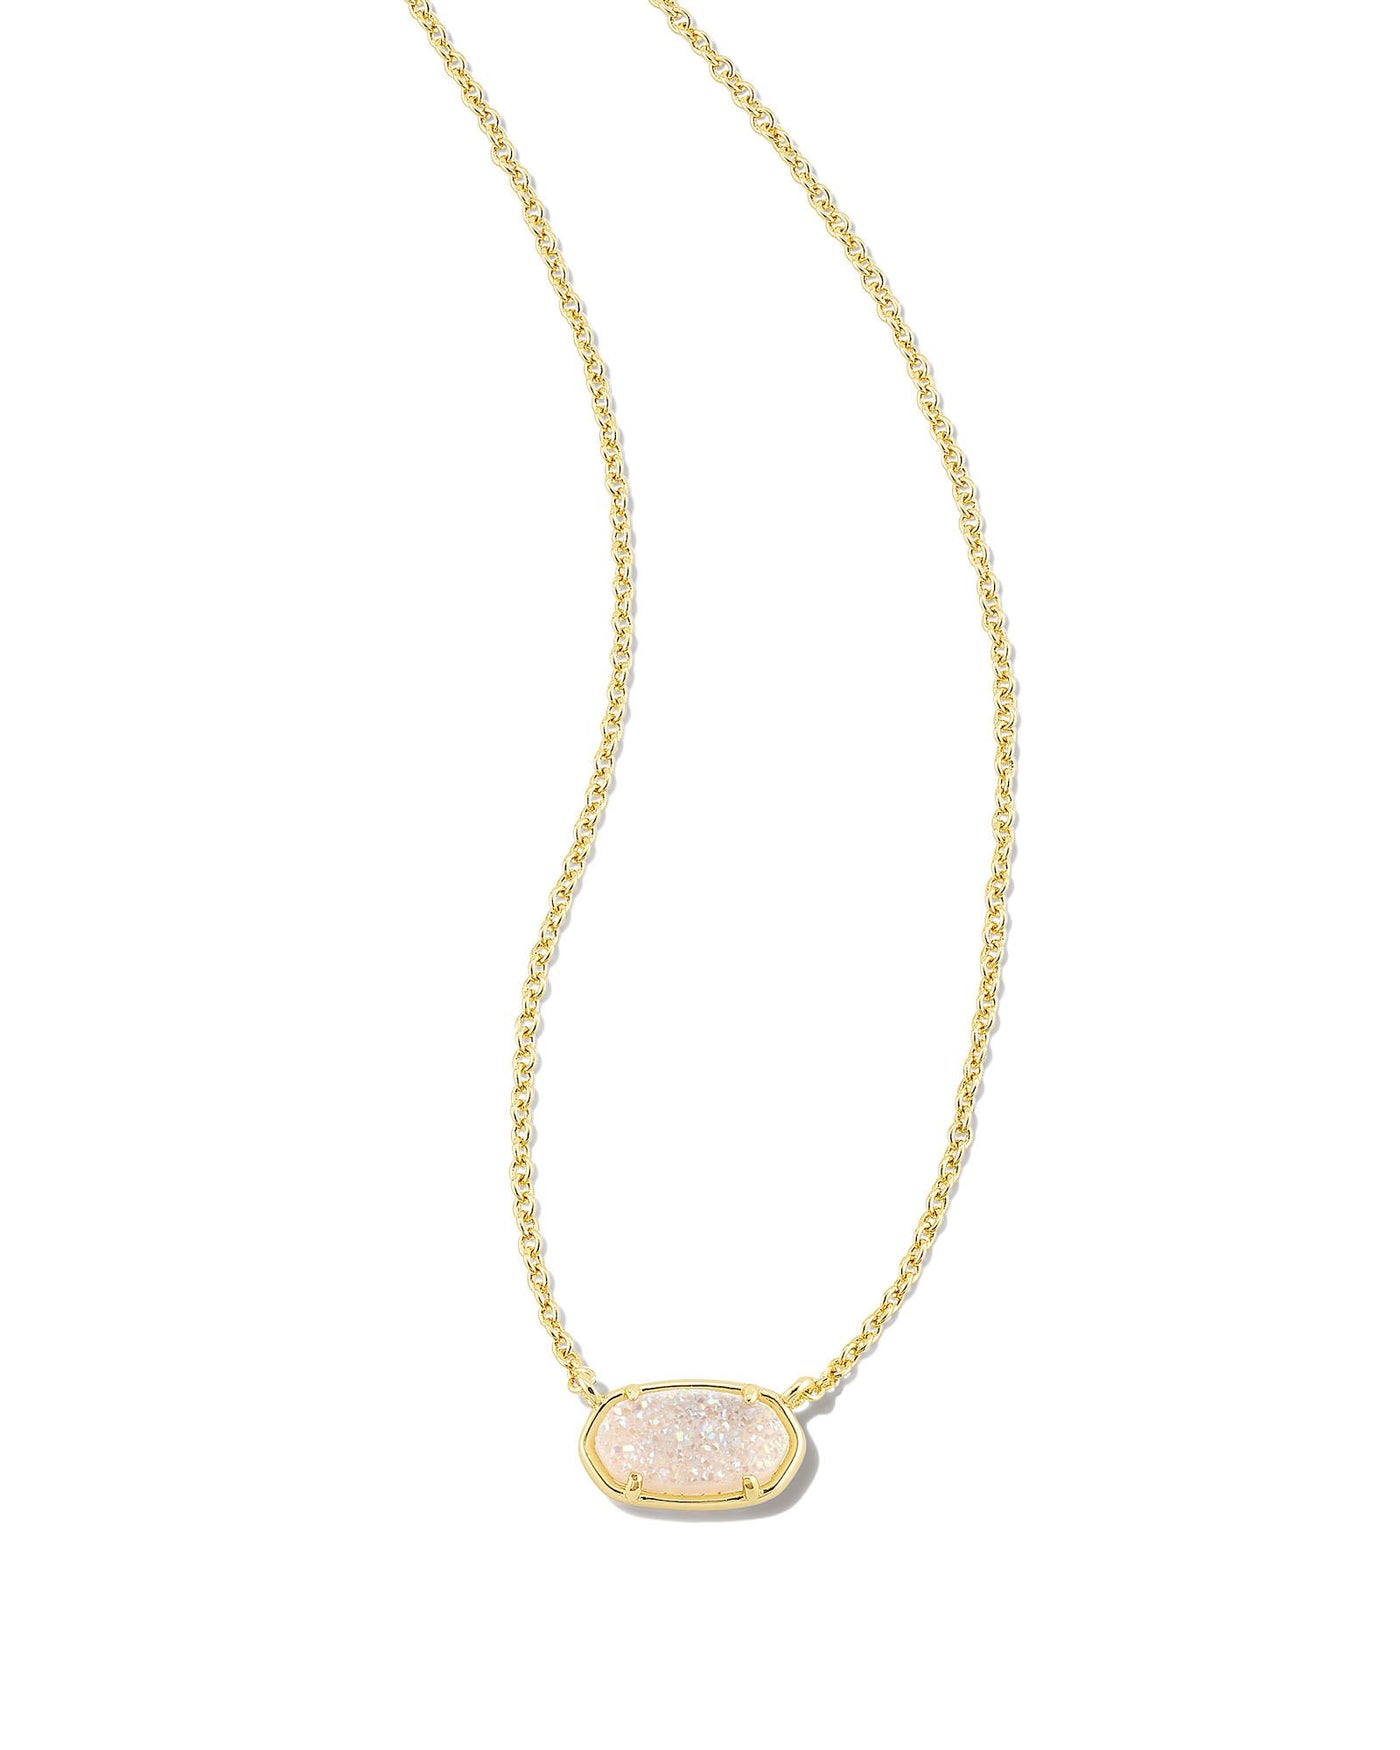 Kendra Scott Grayson Stone Pendant Necklace In Gold Iridescent Drusy-Necklaces-Kendra Scott-Market Street Nest, Fashionable Clothing, Shoes and Home Décor Located in Mabank, TX